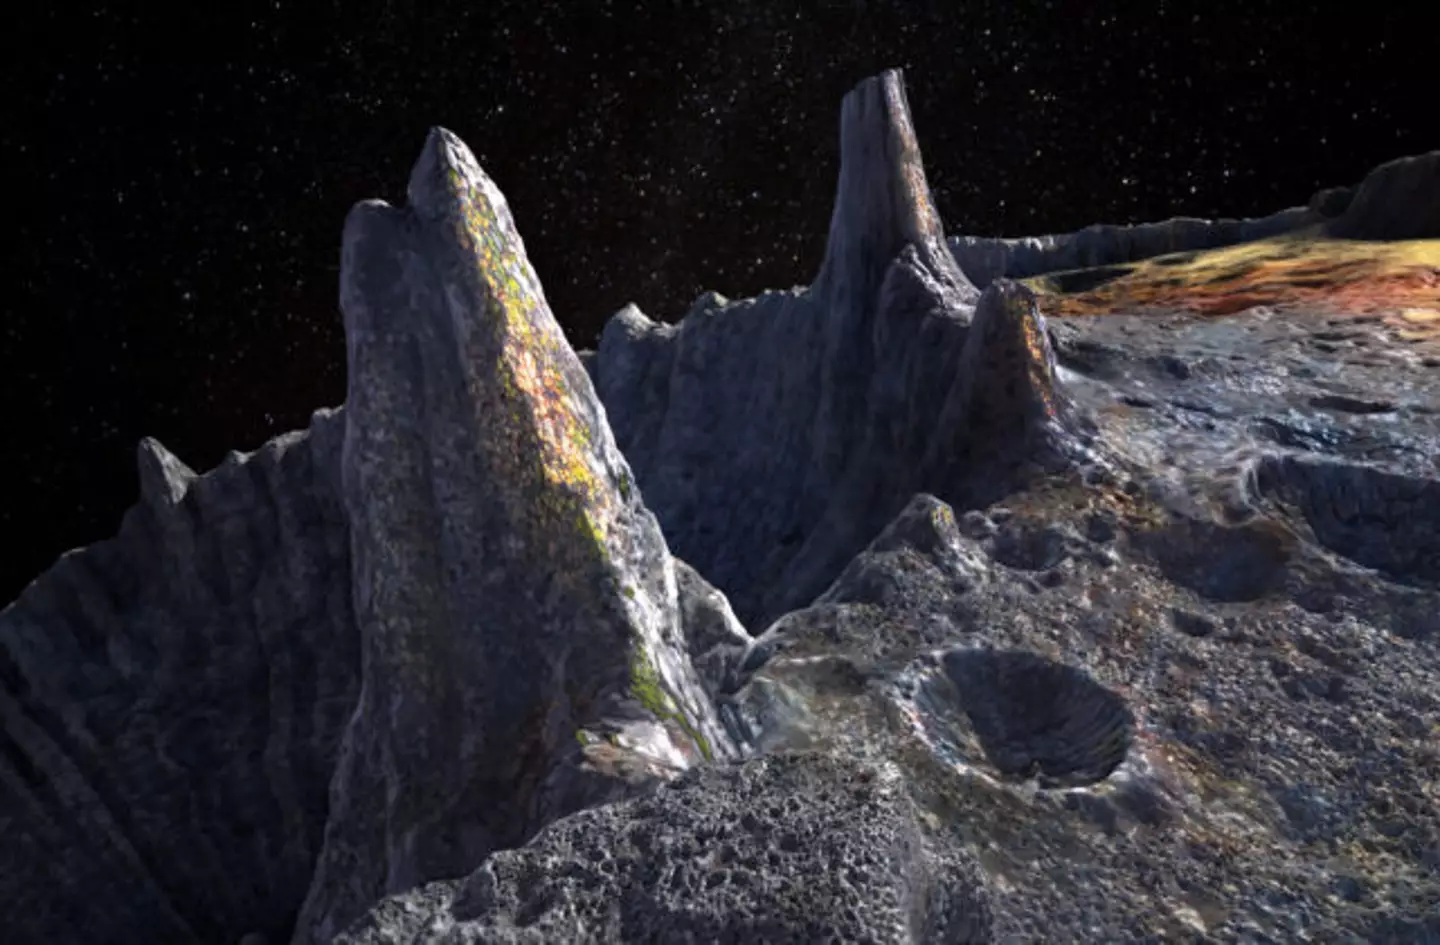 The asteroid is believed to be worth $10 quintillion.